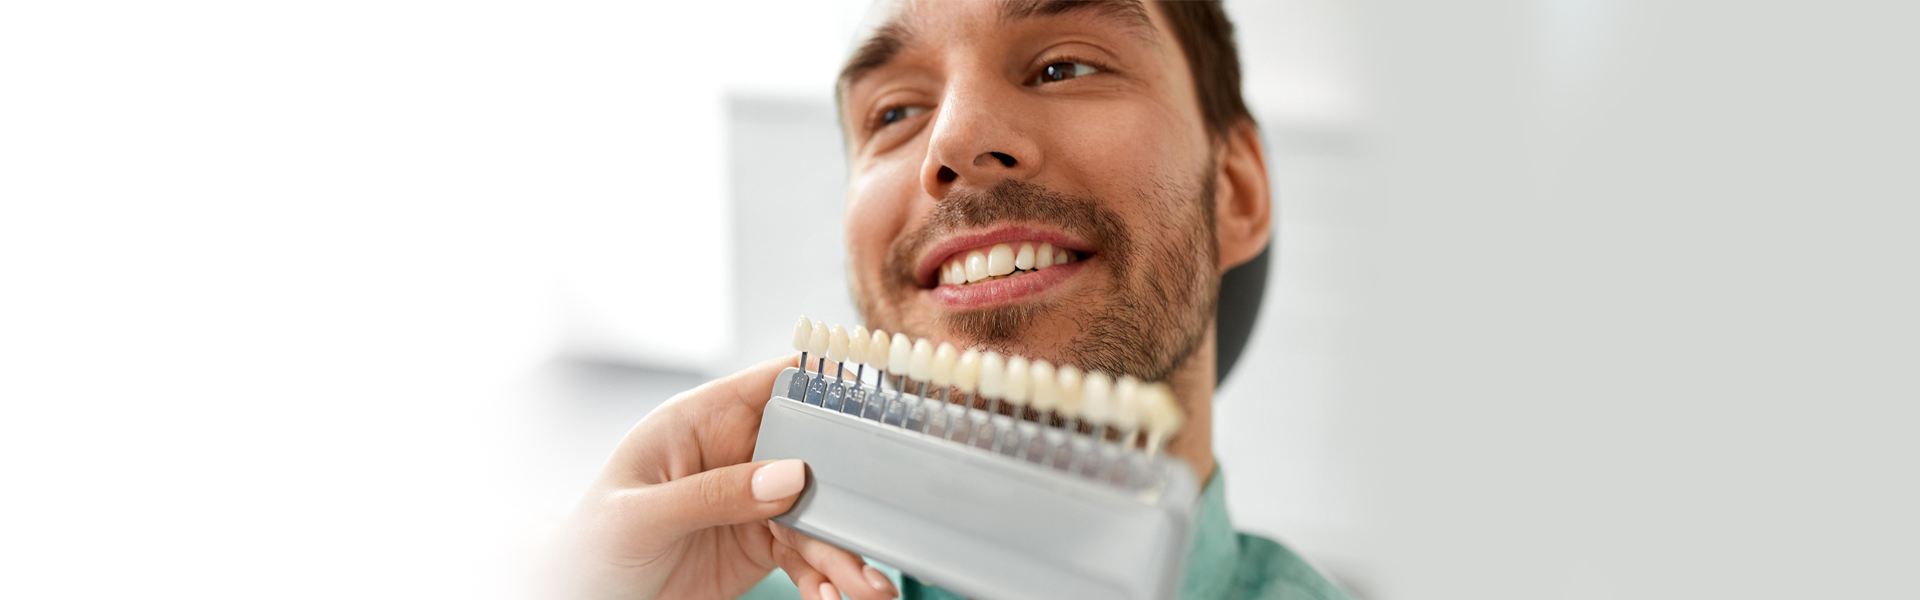 Ask a Cosmetic Dentist About the Dental Veneers Procedure